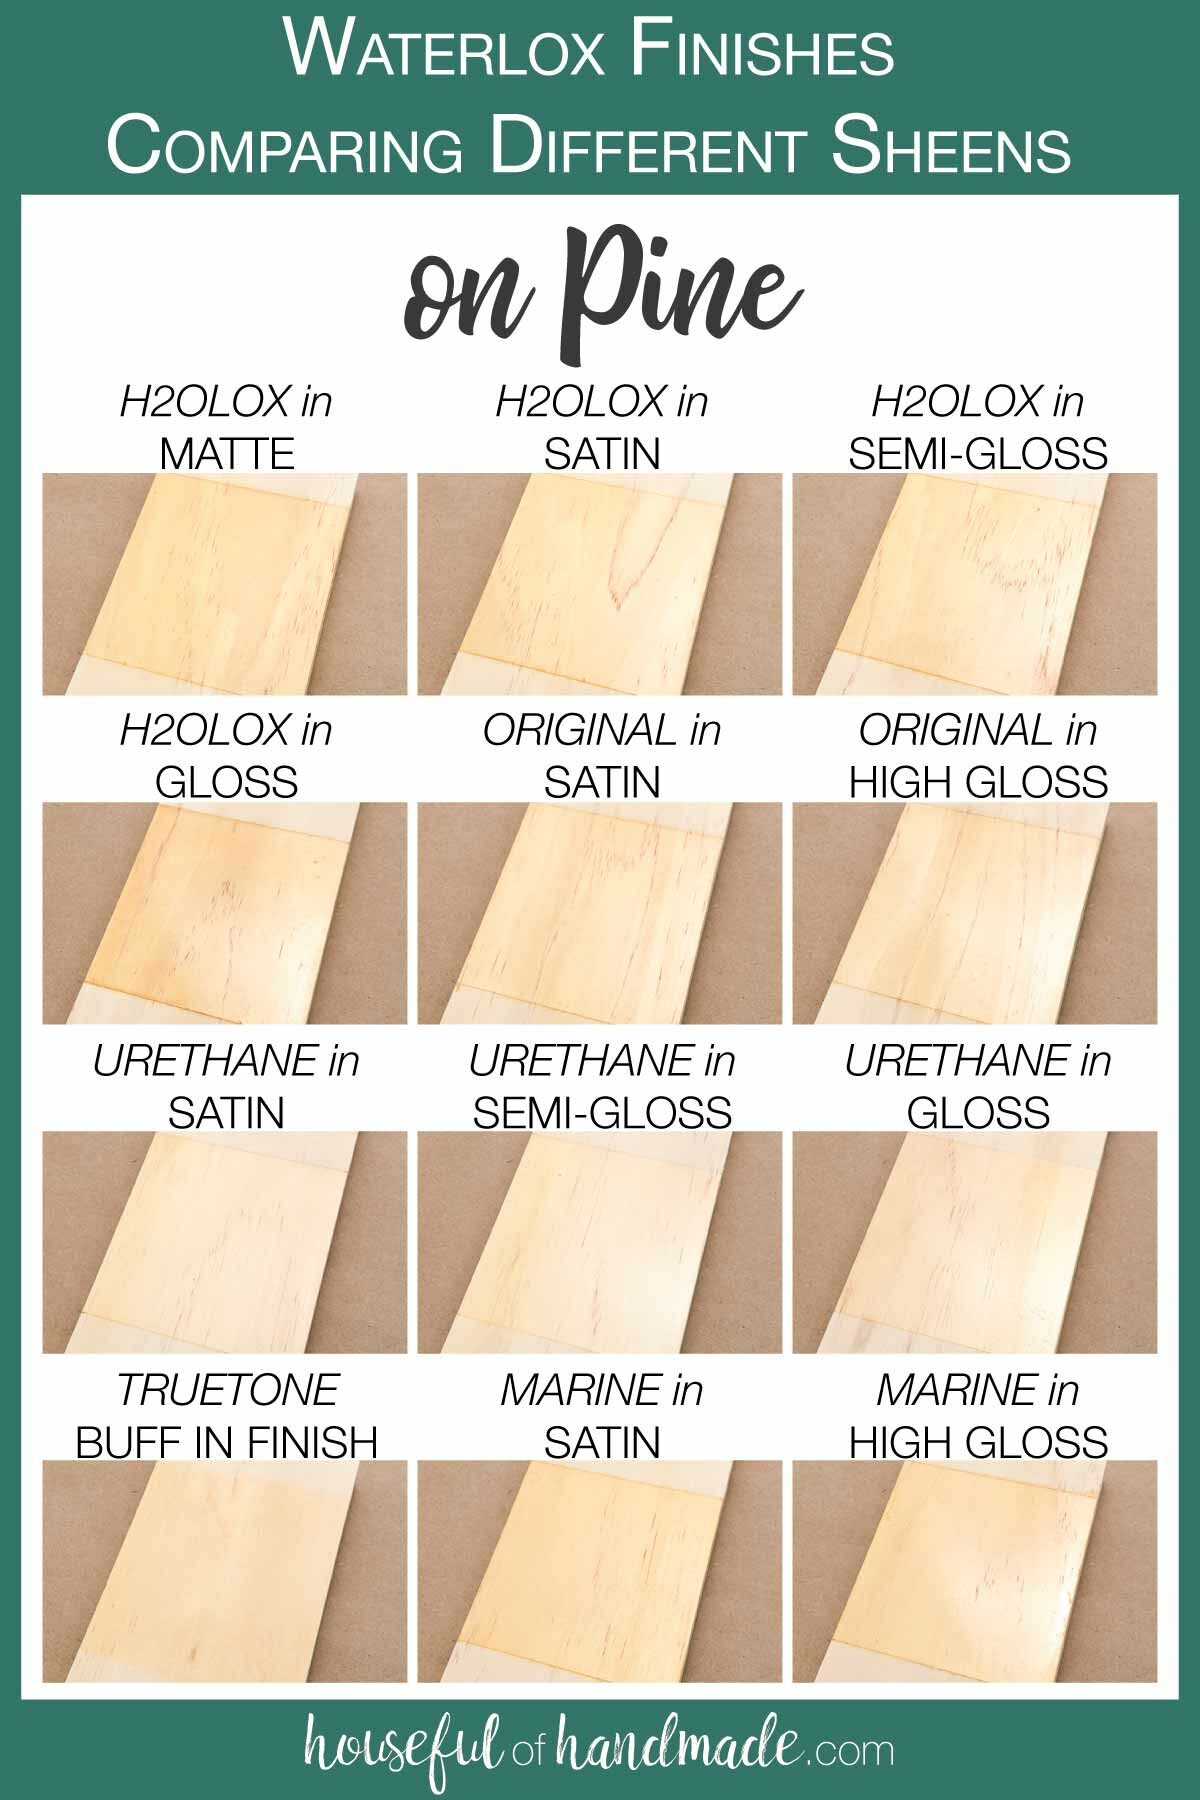 12 samples of the different sheens of all the Waterlox finishes on Pineboards.